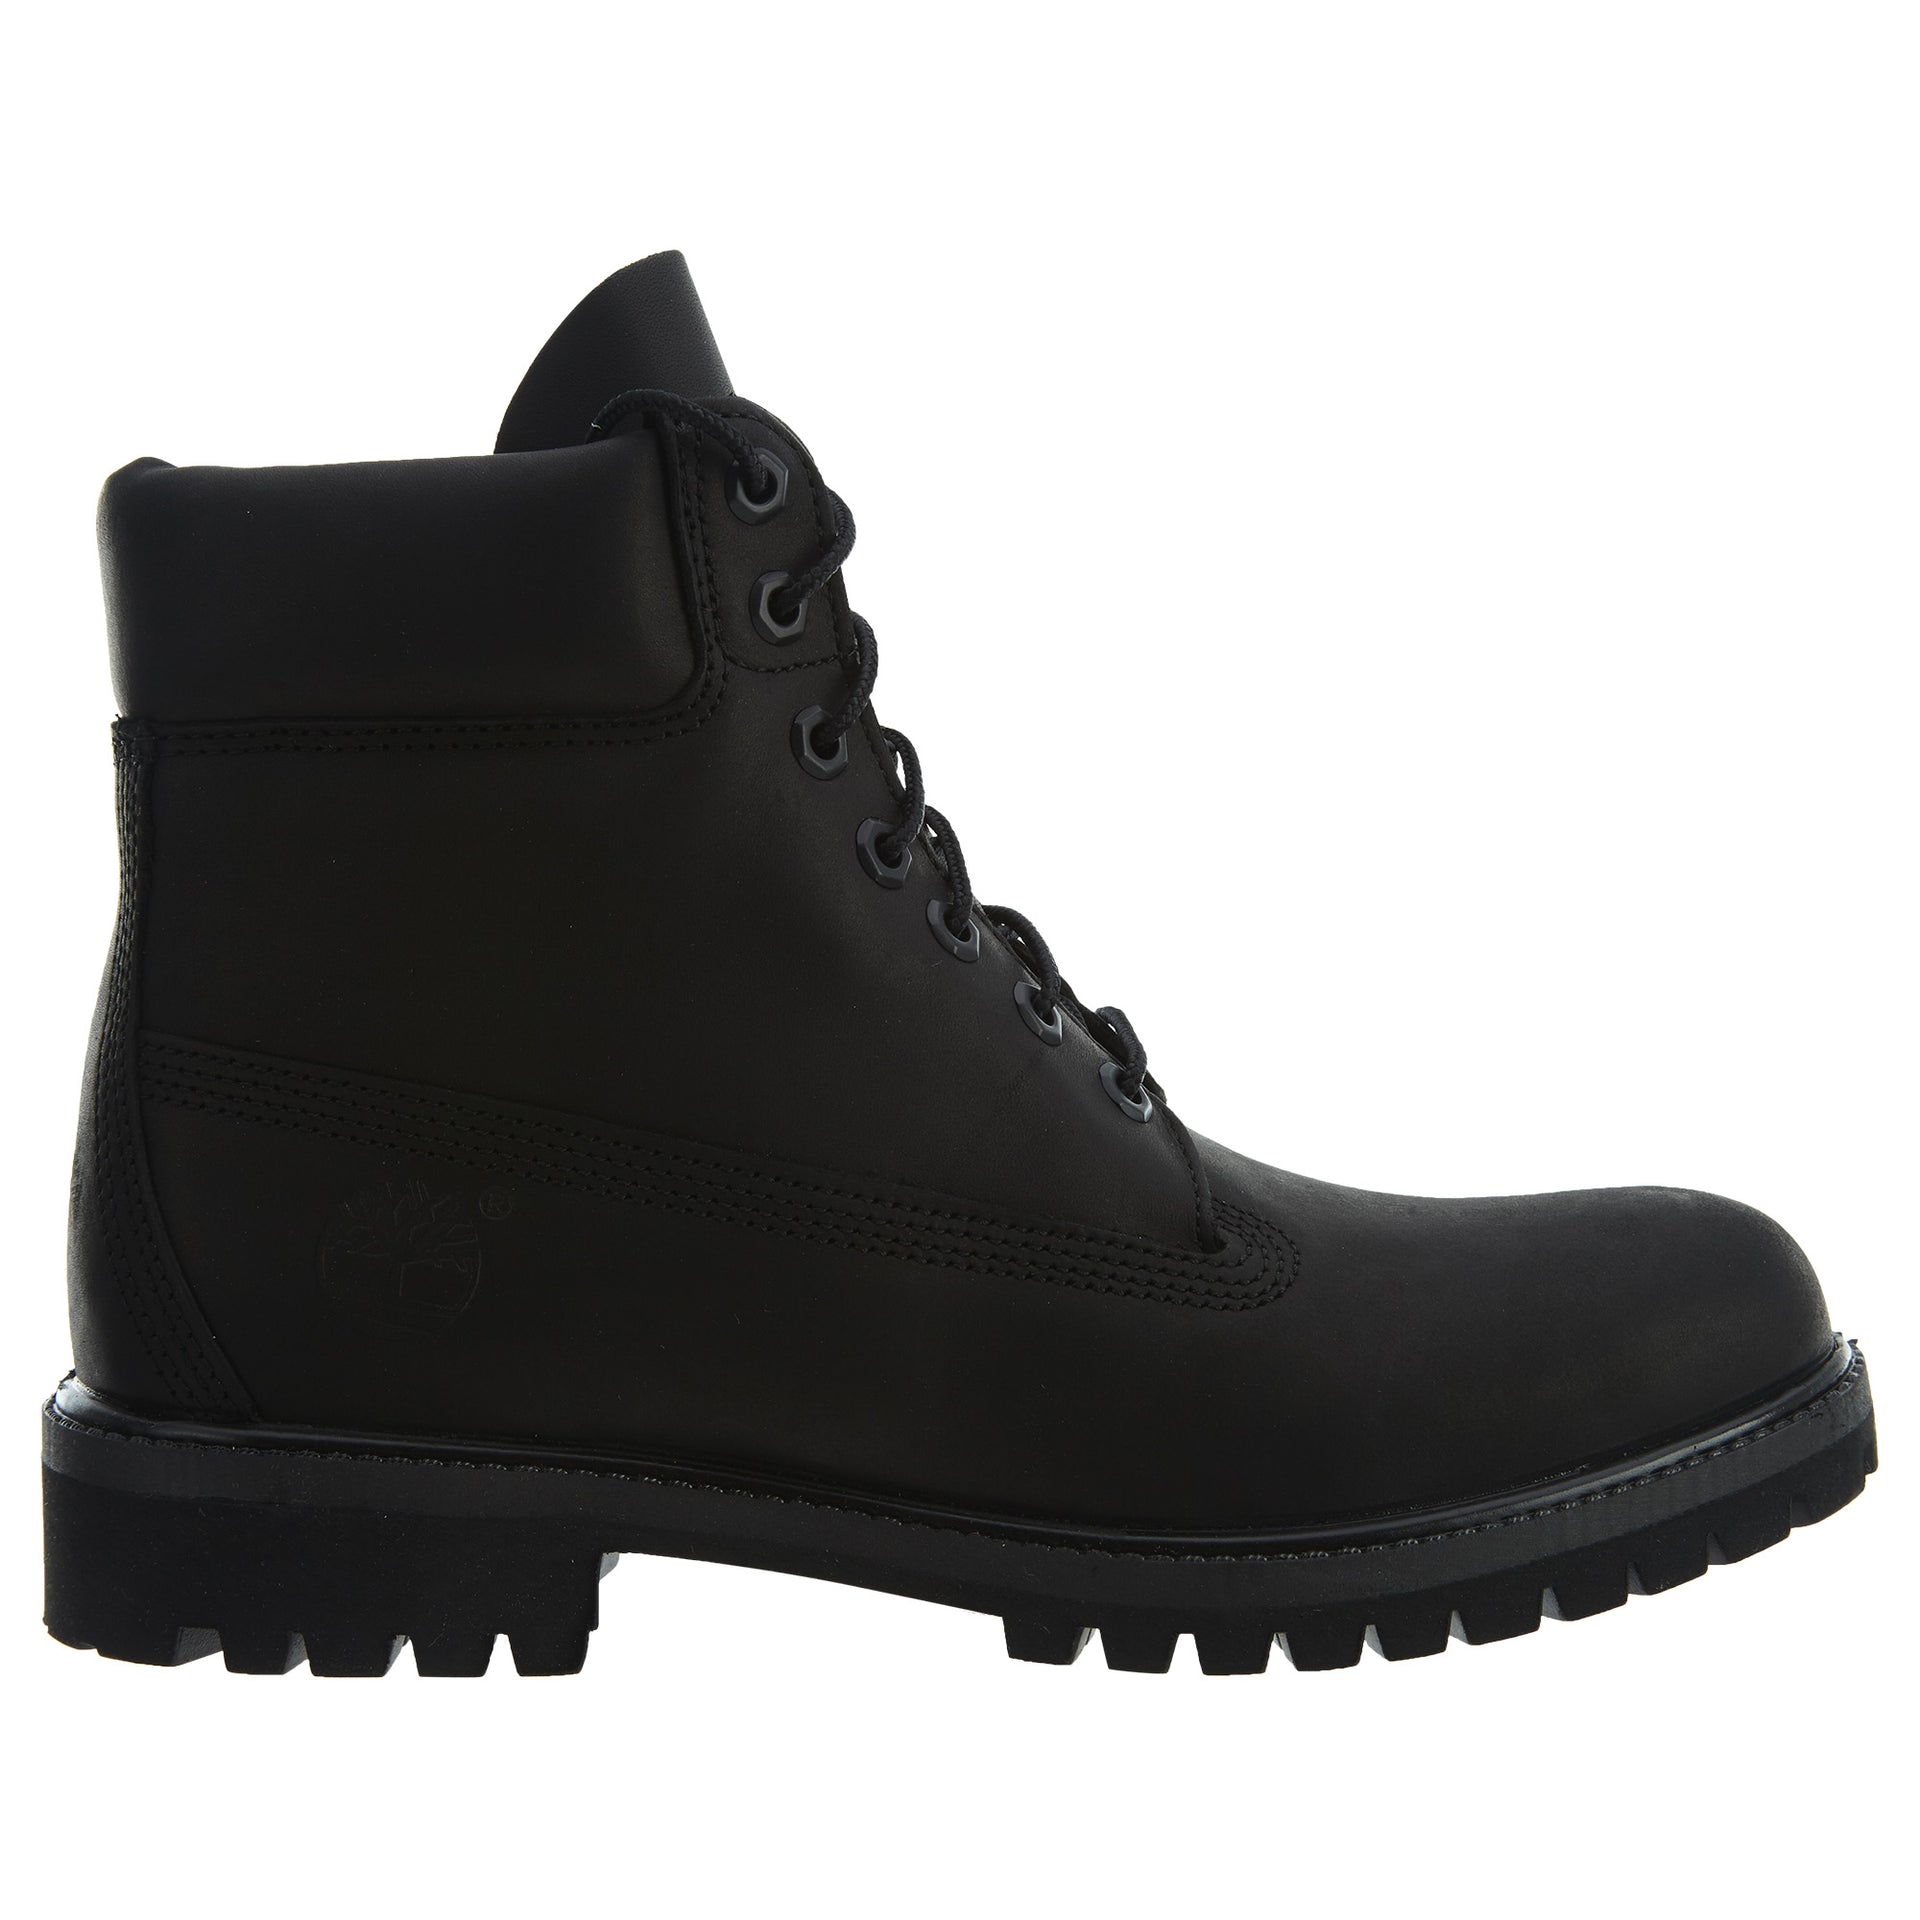 Timberland 6" Premium Boot Mens Style : Tb0a1ma6